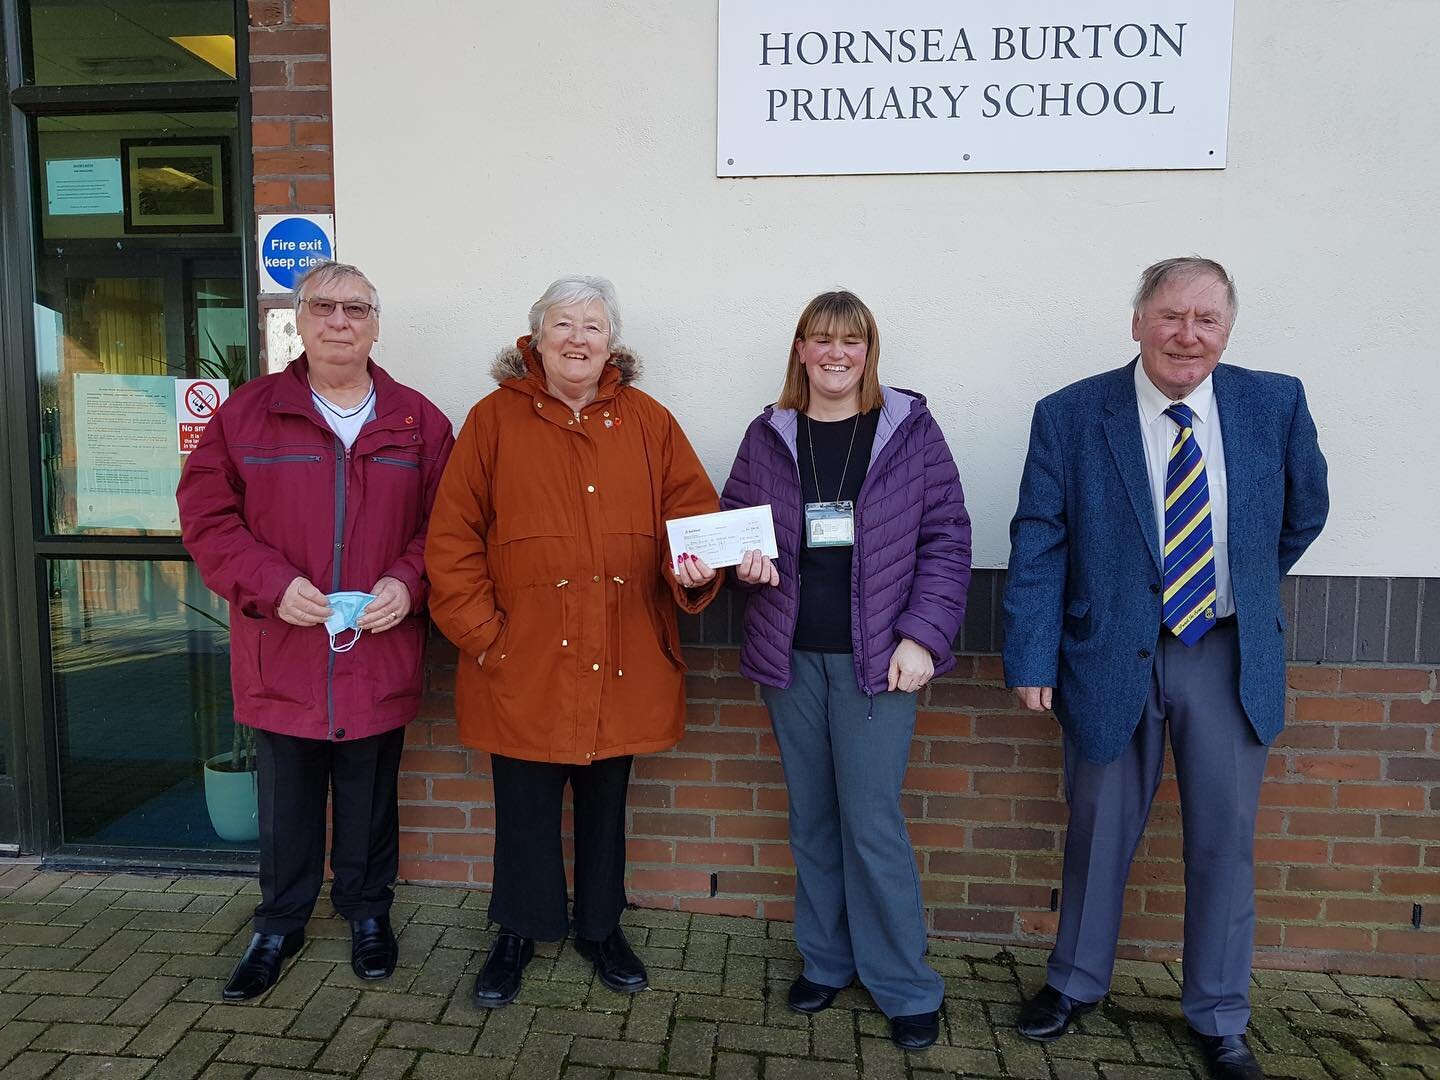 We were delighted today to be presented with a cheque from the Hornsea Lions which will go towards upgrading the very old interactive whiteboards across the Hornsea Burton and Skipsea Federation for Key Stage 2 classes. We are so grateful for the ver